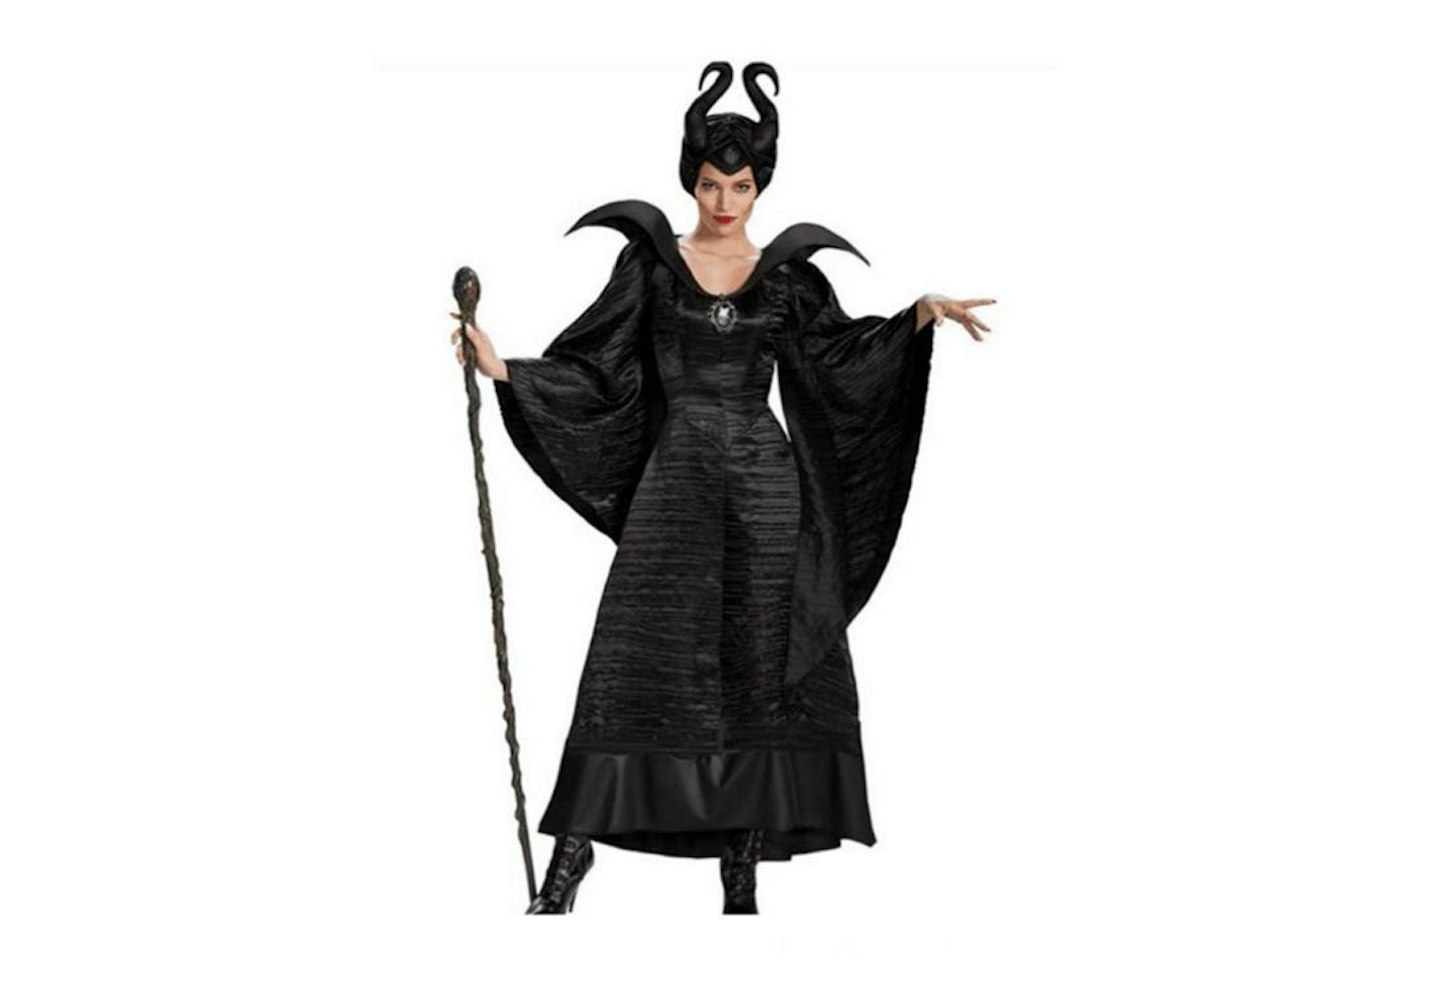 Witch fairytale costume (aka Maleficent!)